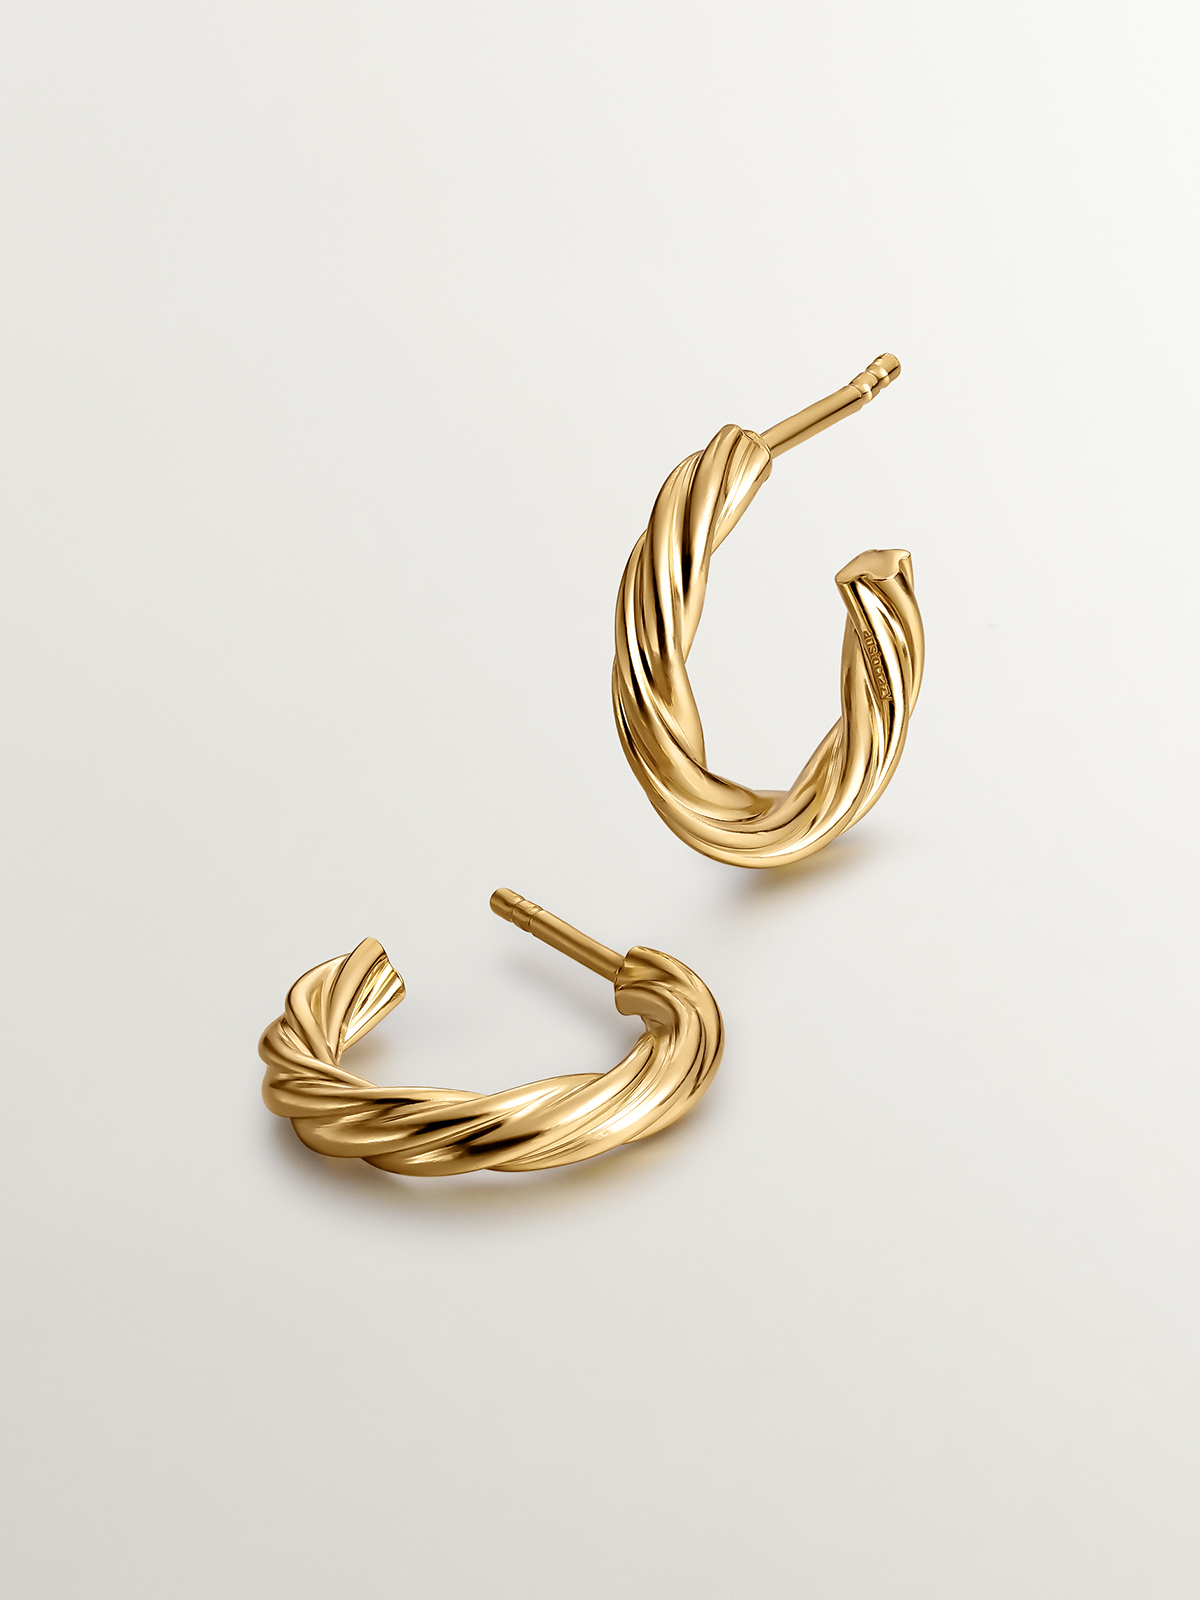 Medium hoop earrings made of 925 silver covered in 18k gold with fluted texture.